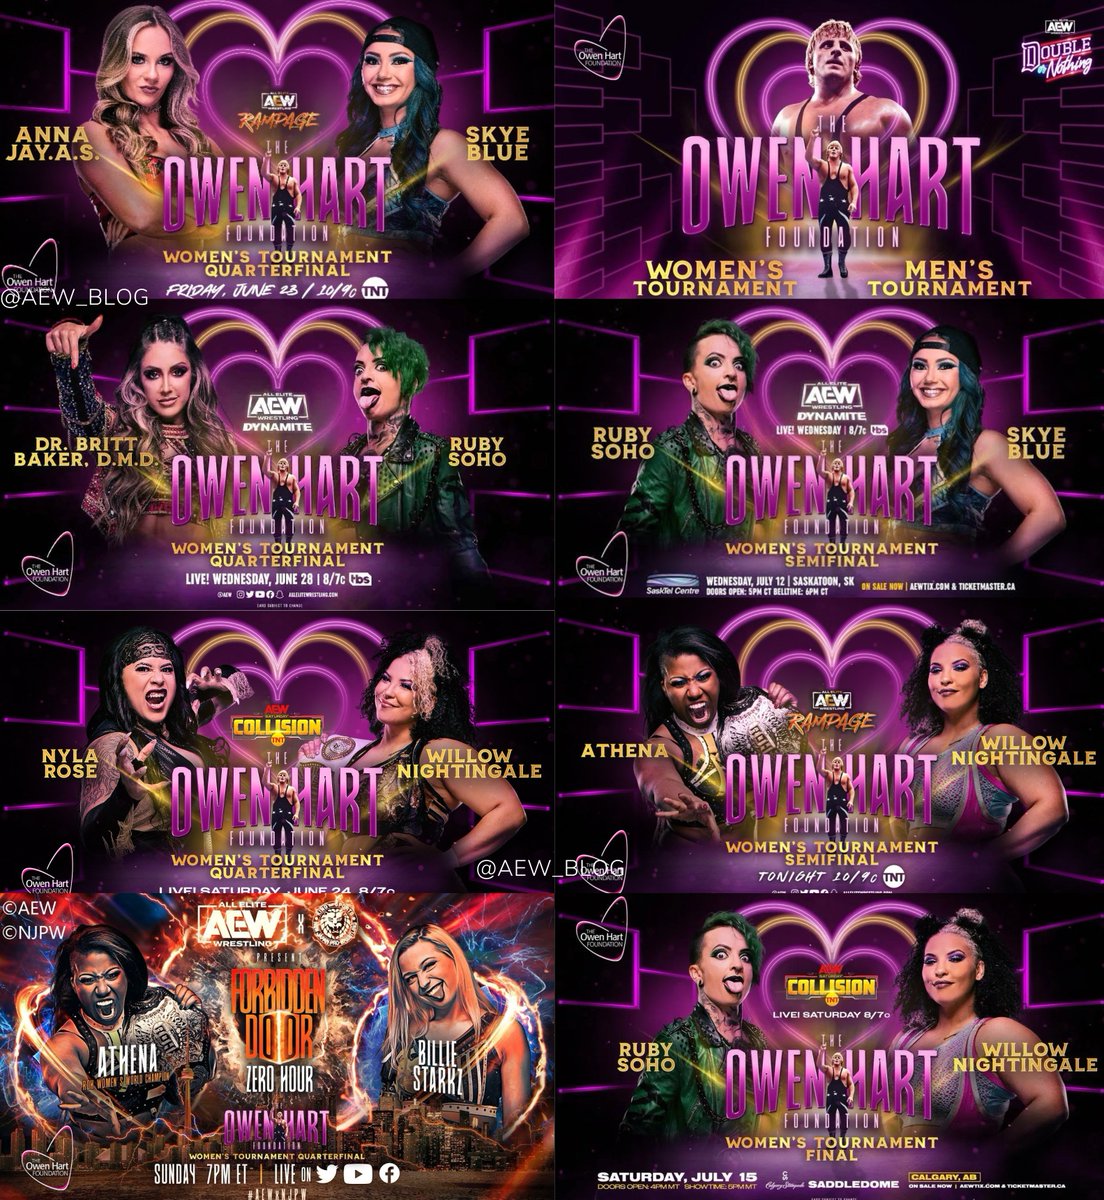 AEW The Owen Hart Foundation Cup Tournament. All Matches From The 2nd Owen Hart Cup. Female Winner: Willow Nightingale This second Owen Cup tournament was a lot shorter than the first. Hopefully, they go back to the original format with more matches leading up to #AEWDoN 🎰